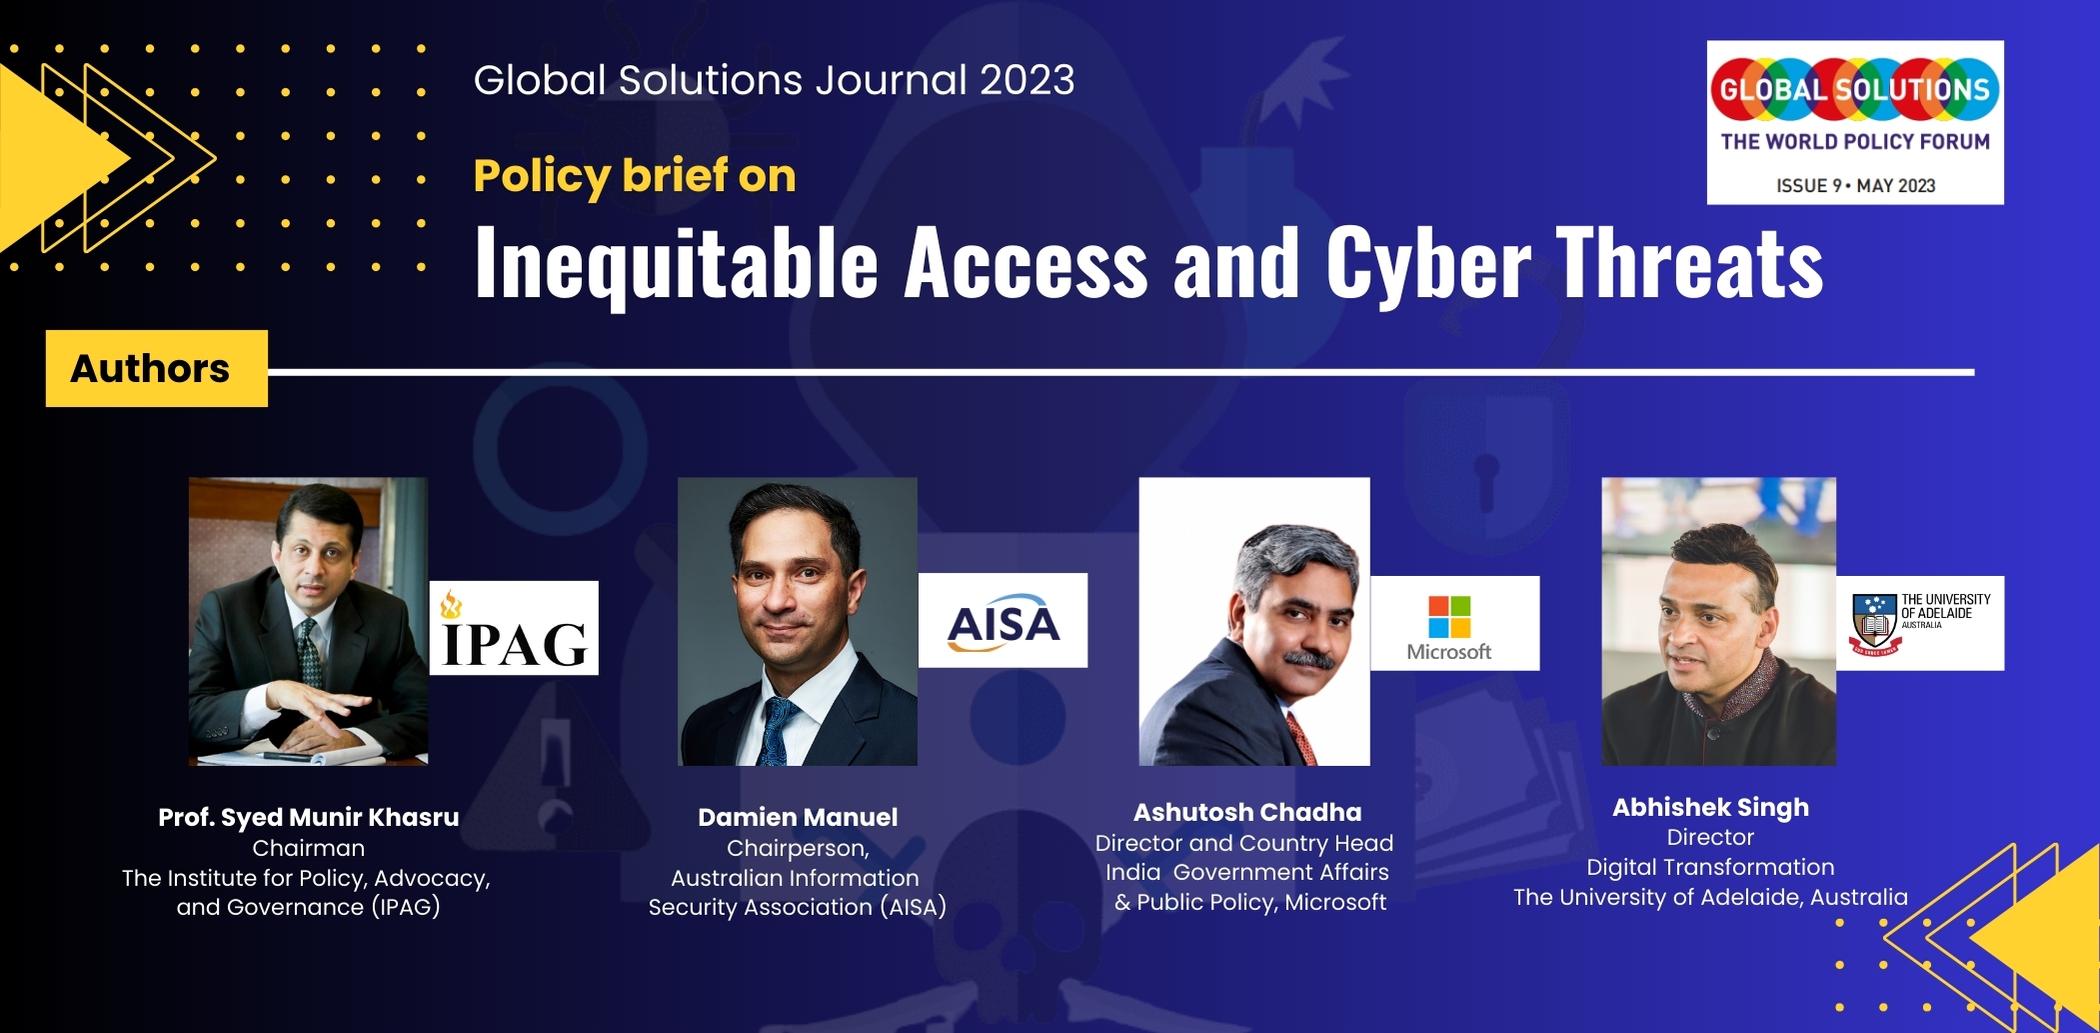 Policy brief on Inequitable Access and Cyber Threats